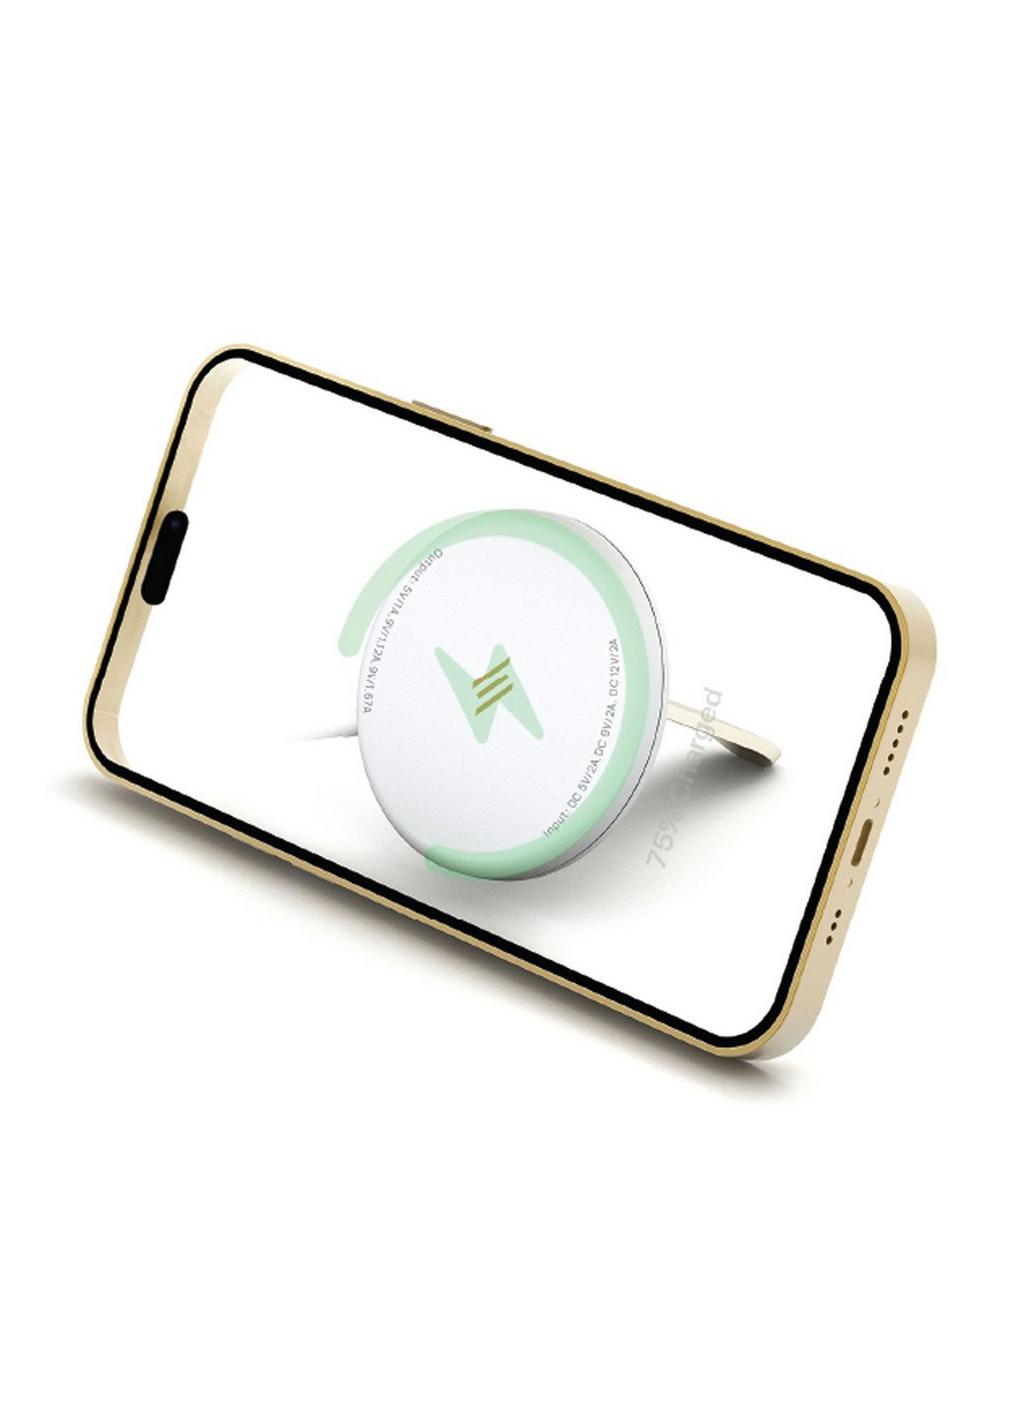 Smart Wireless Megasafe Charger | Color White and Silver | Mobile Chargers | Best Mobile Accessories in Bahrain | Halabh